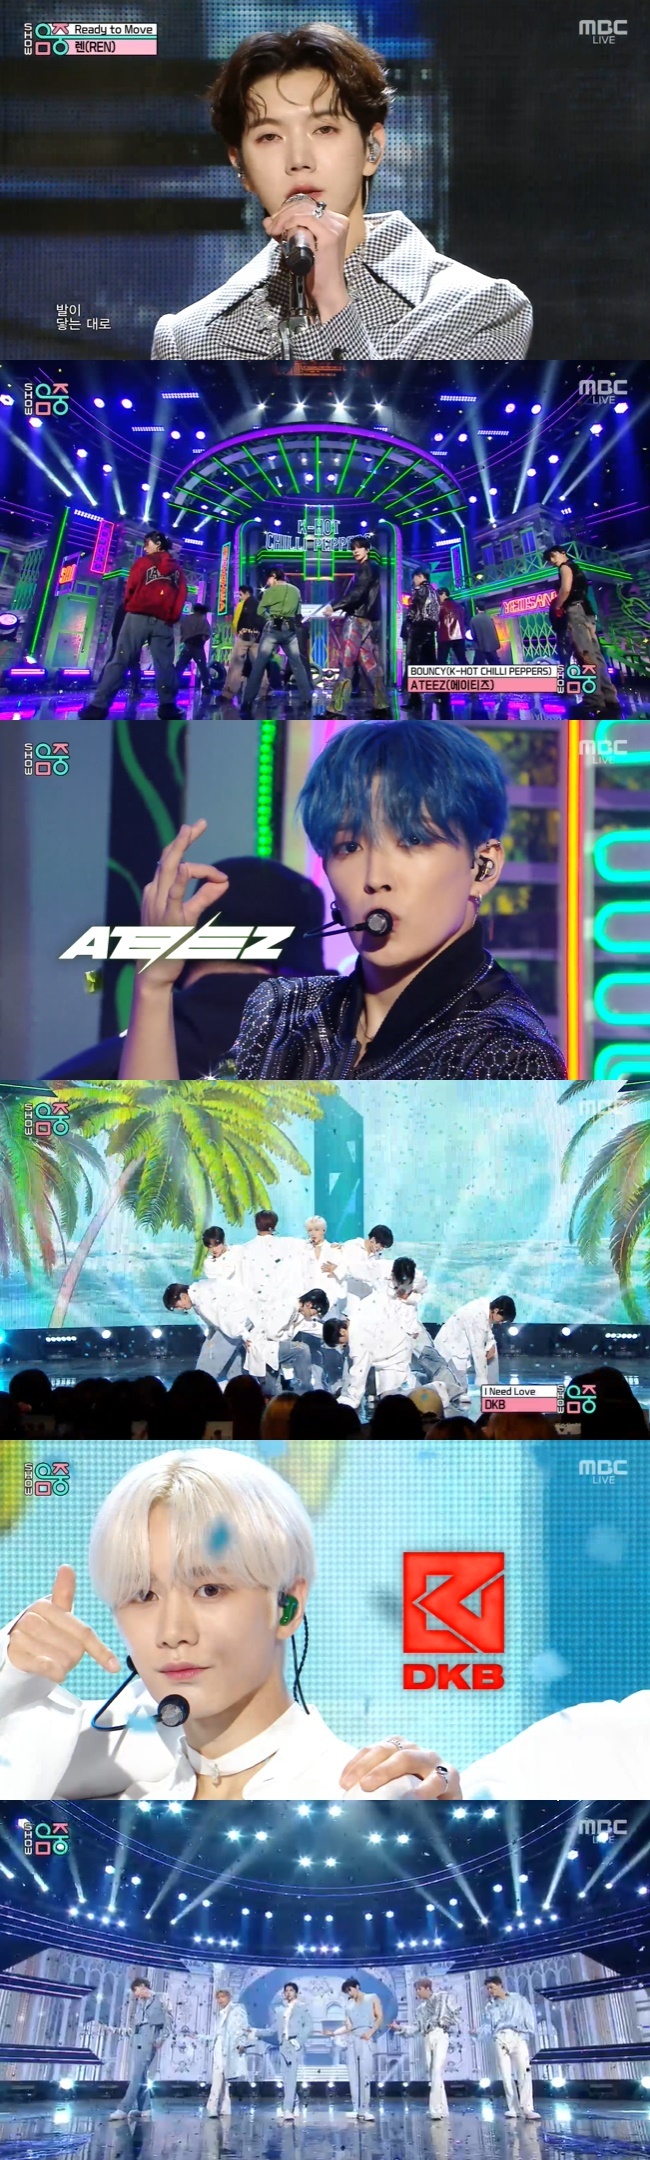 Lim Young-woong beats Stray Kids, (girl) kids to top  ⁇ Show! Music Core ⁇In the MBC  ⁇  Show! Music Core  ⁇  broadcast on June 17, Lim Young-woongs  ⁇  Sand Granular material  ⁇  topped the list.Len from New East made his solo debut with Ready To Move.Ready to Move is a pop number with a sensual beat starting with a unique and mysterious synthesizer sound.Ateez returned to Mini 9s THE WORLD EP.2: OUTLAW ⁇  (The World Episode 2: Outlaw).Ateez set up a hot stage by showing train play choreography and waist-breaking choreography reminiscent of Limbo with the title song  ⁇ BOUNCY ⁇  (Bouncey) with witty lyrics.VAV, which has lost 8 ~ 9kg for a comeback after completing the military white flag, has set up the  ⁇ Designer  ⁇  (designer) stage with a more mature charm, and DKB is also free and refreshing with  ⁇ I Need Love  ⁇  I conveyed charm.The show featured Ren, Taeyong, Ateez, Baek Ye-bin, VAV, DKB, Fantasy Boyz, Lunate, CIX, Nine to XIX, Secret Number, Piwon Harmony, Dune XIX (TNX), Black Swan, and Park Rossi.